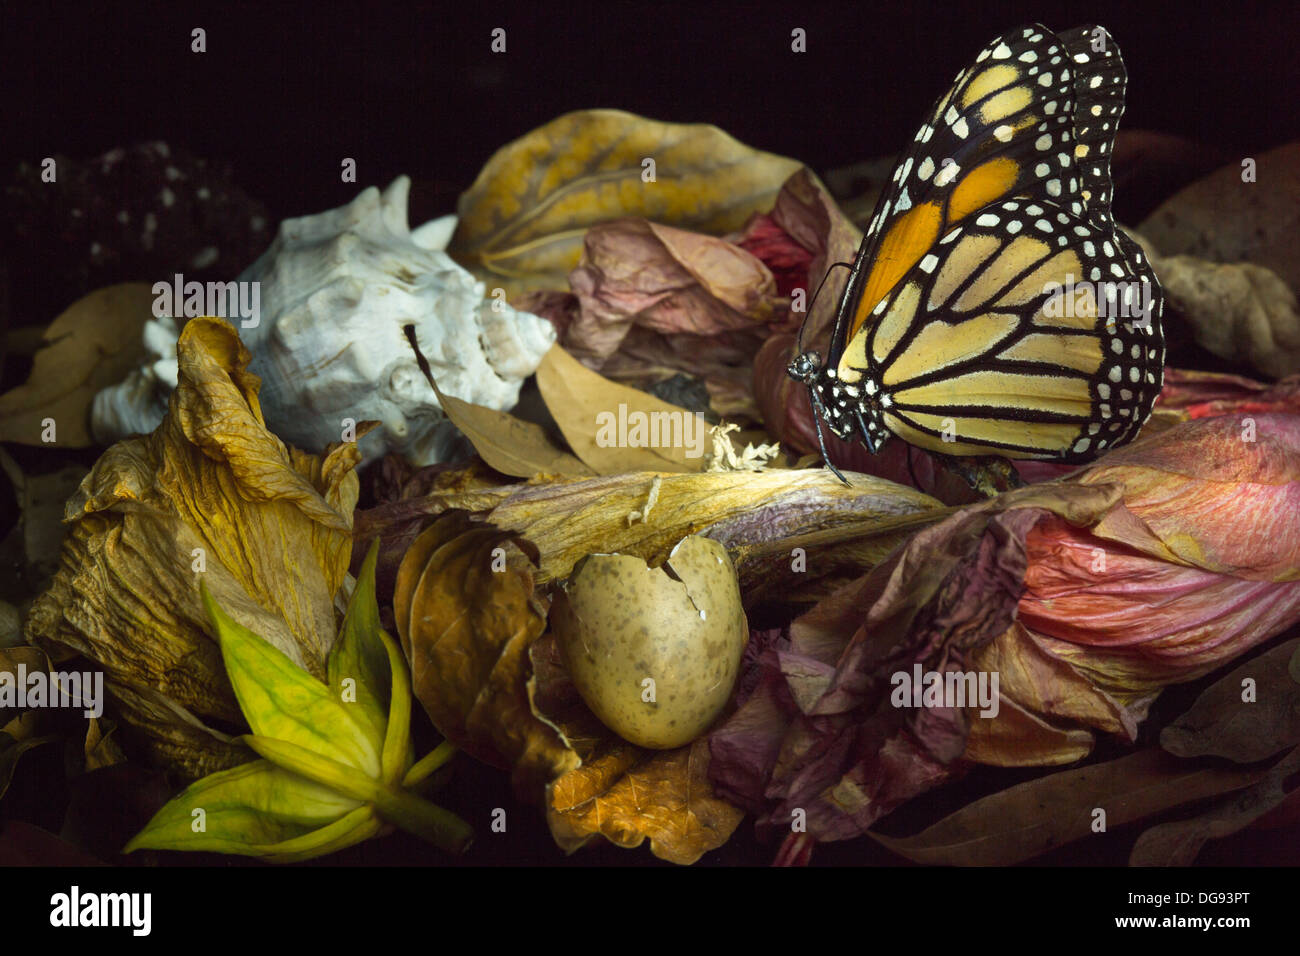 Still life featuring monarch butterfly, seashell and dying flowers Stock Photo